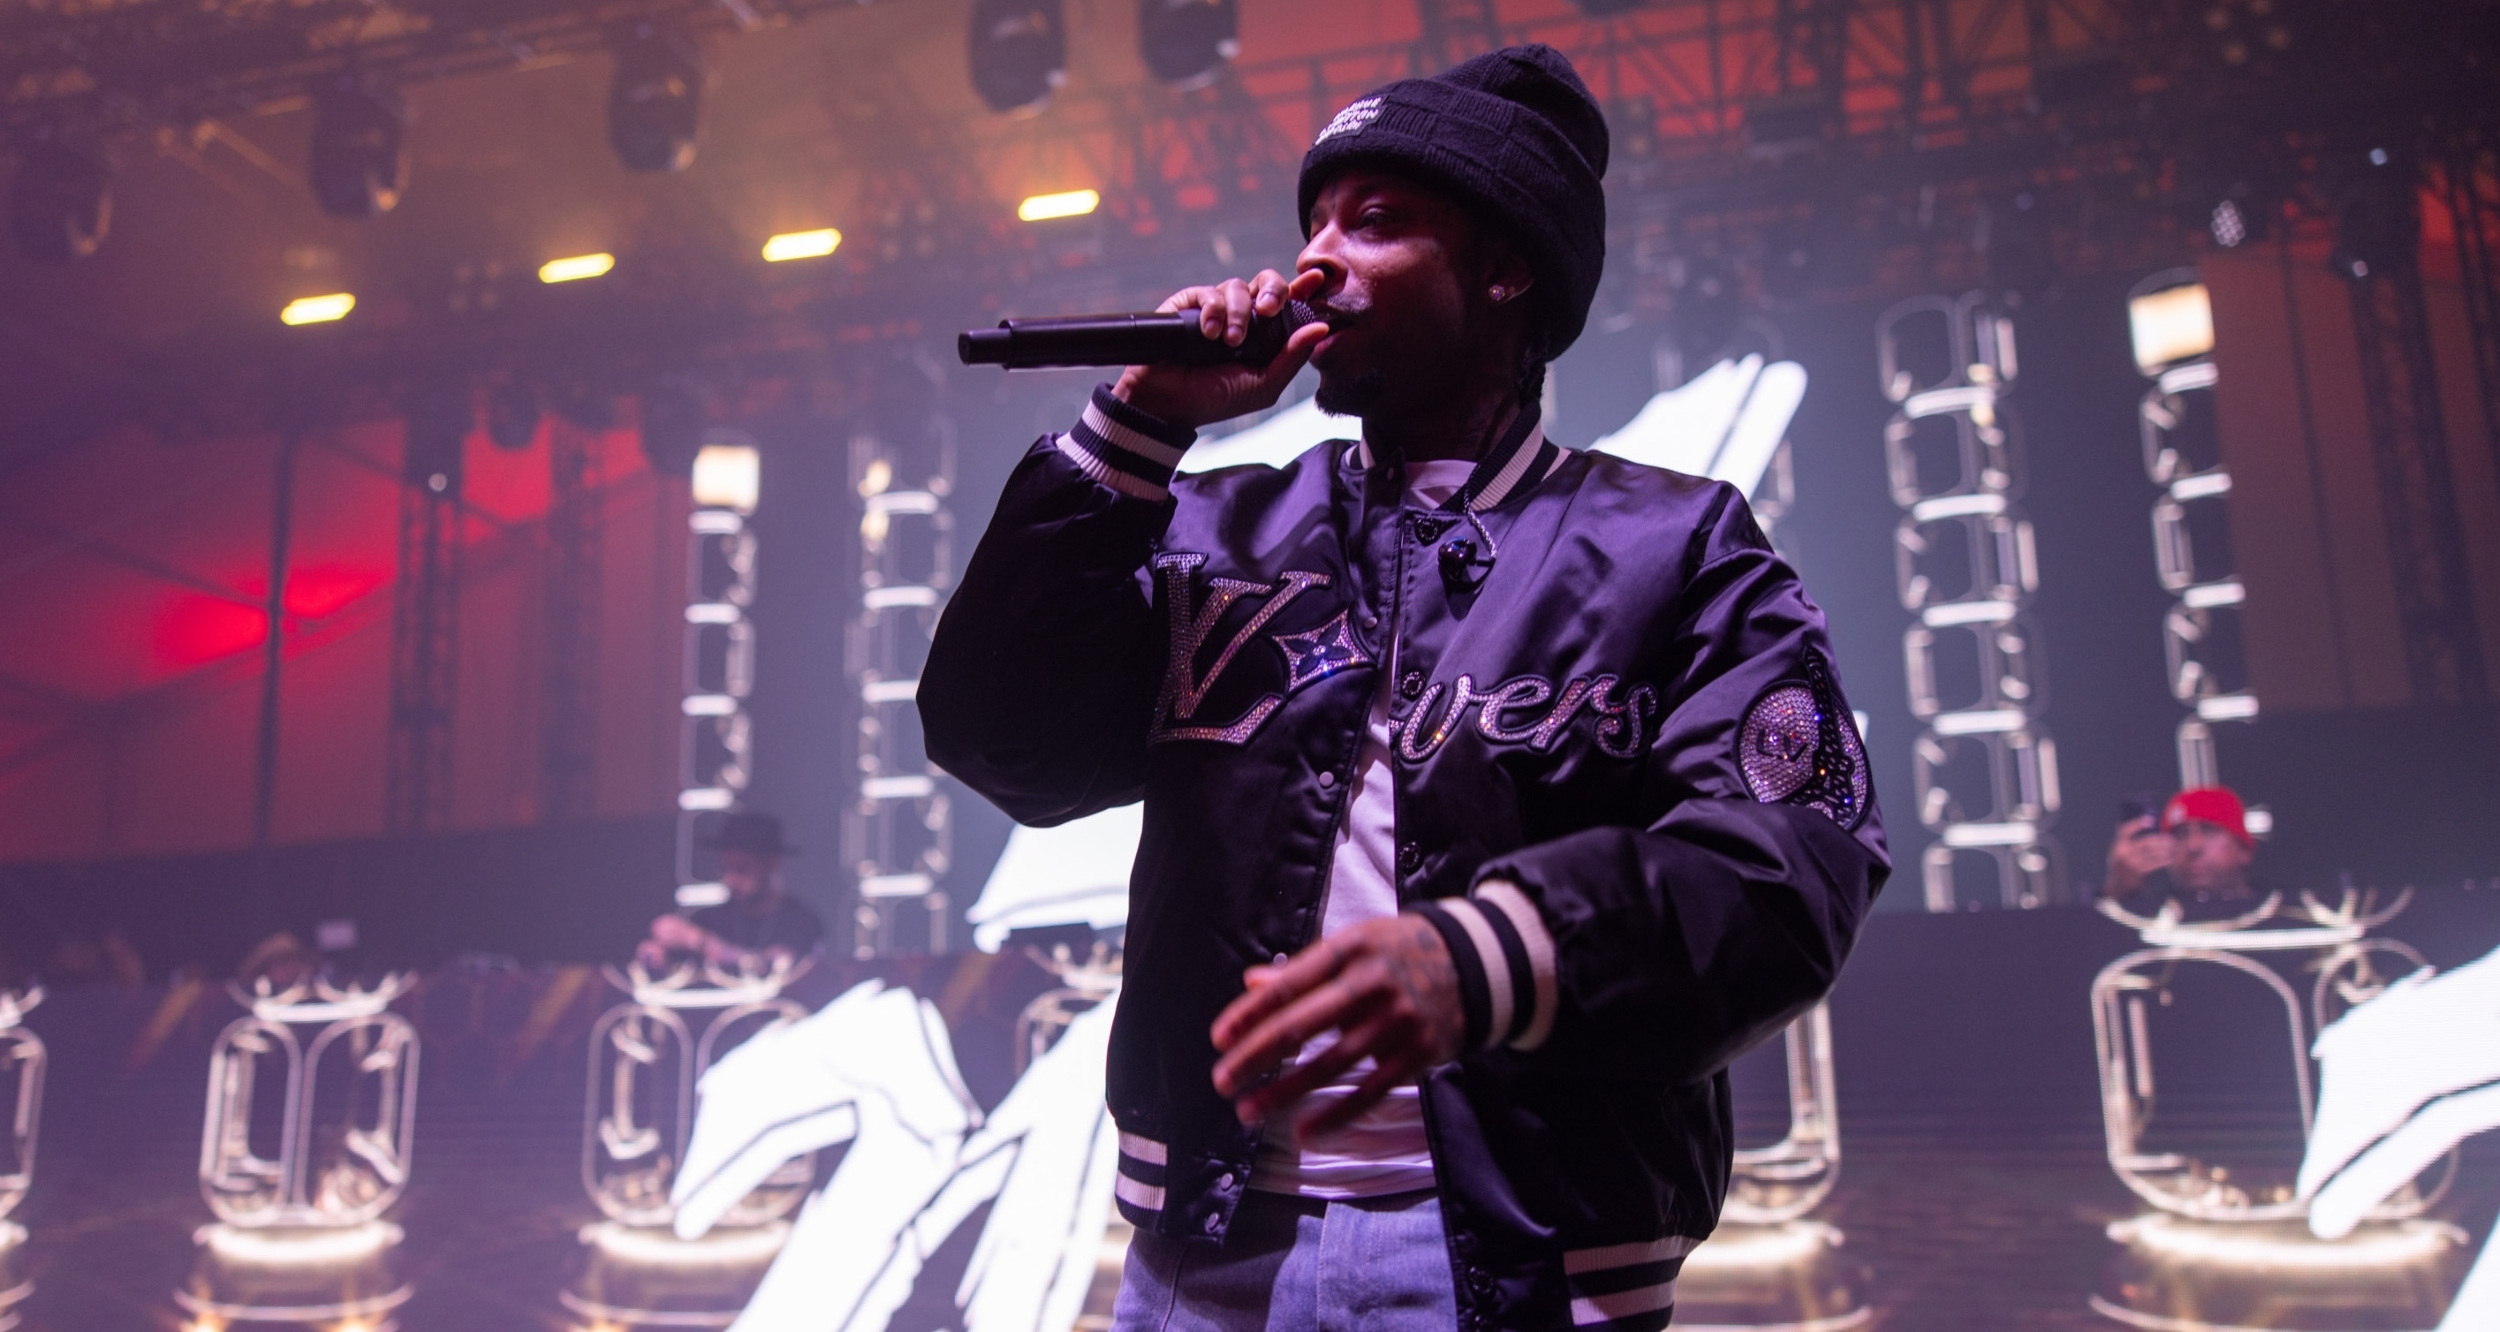 Inside The Maxim Big Game Experience In Las Vegas Featuring 21 Savage & 50 Cent